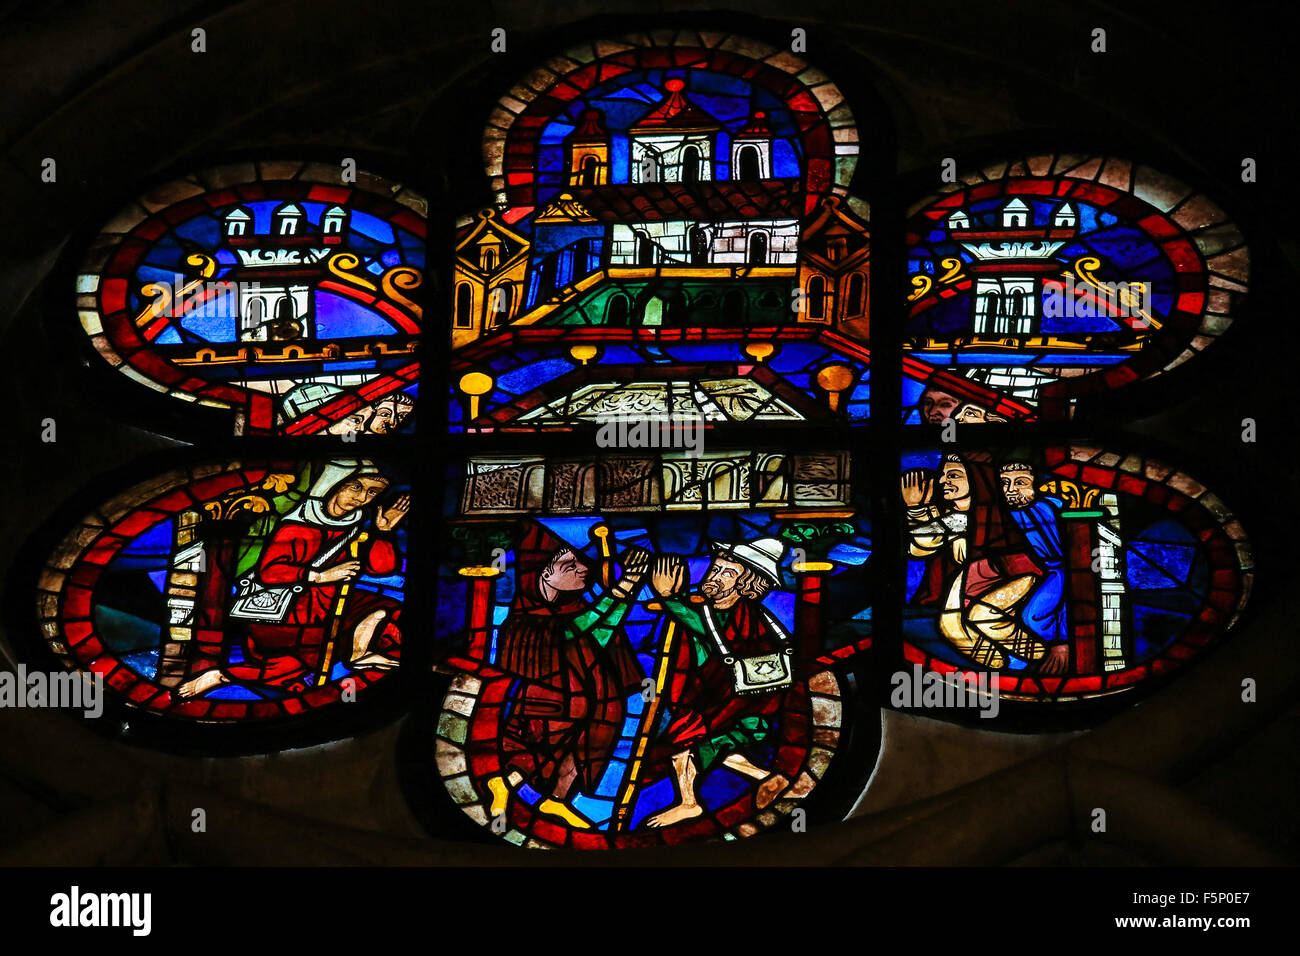 LEON, SPAIN - AUGUST 12, 2014: Stained Glass window depicting the Arc of the Covenant in the Cathedral of Leon in Castile and Le Stock Photo